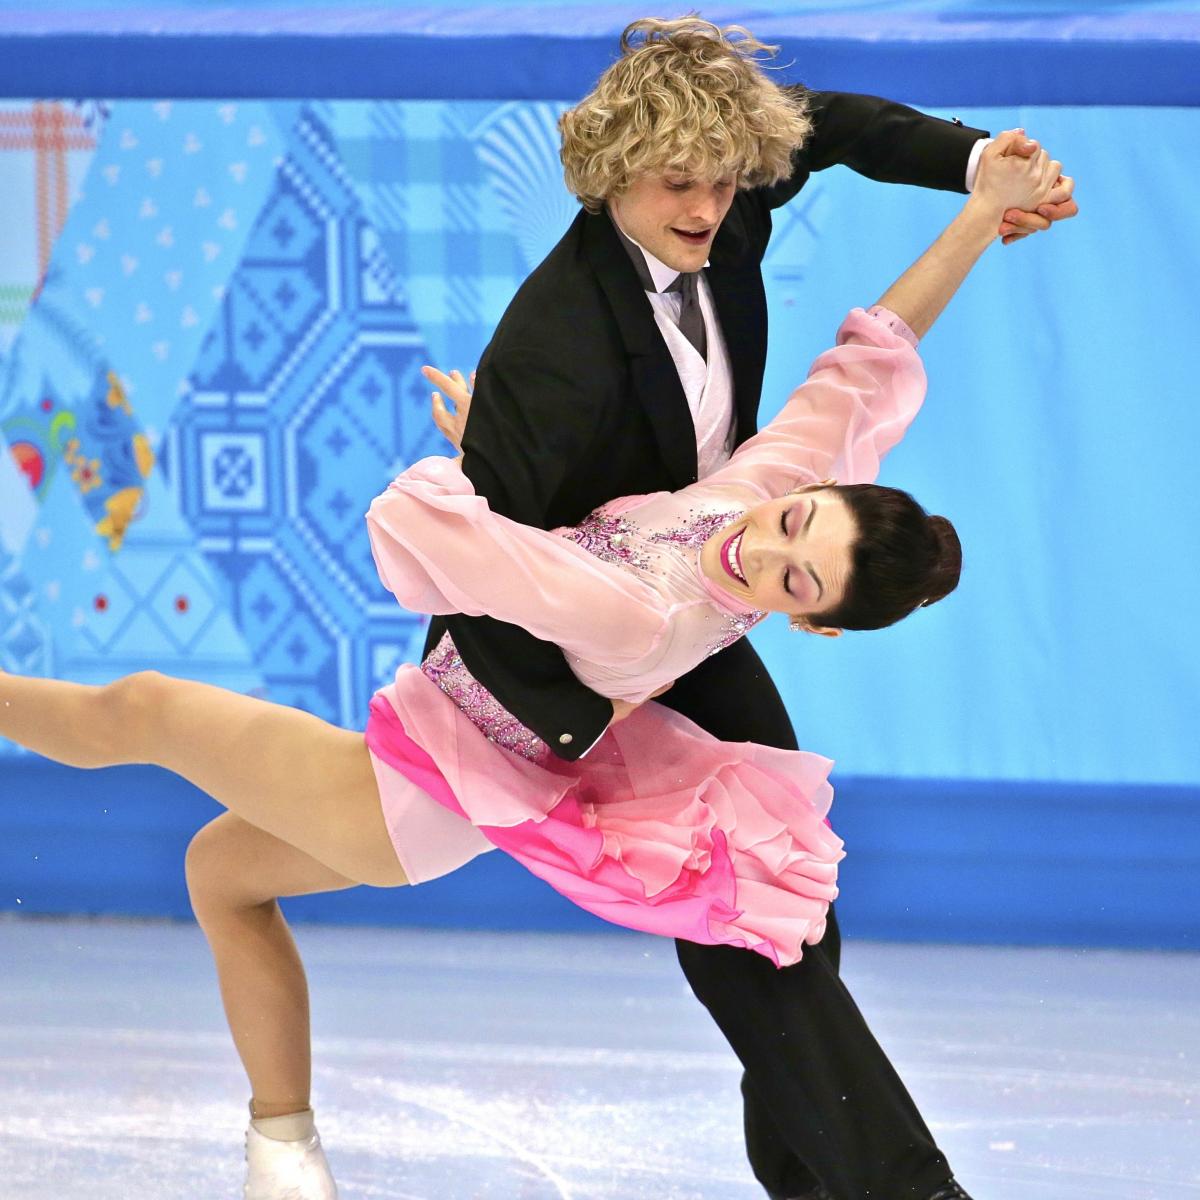 Olympic Ice Dancing 2014 Ice Dance Short Results, Point Standings and